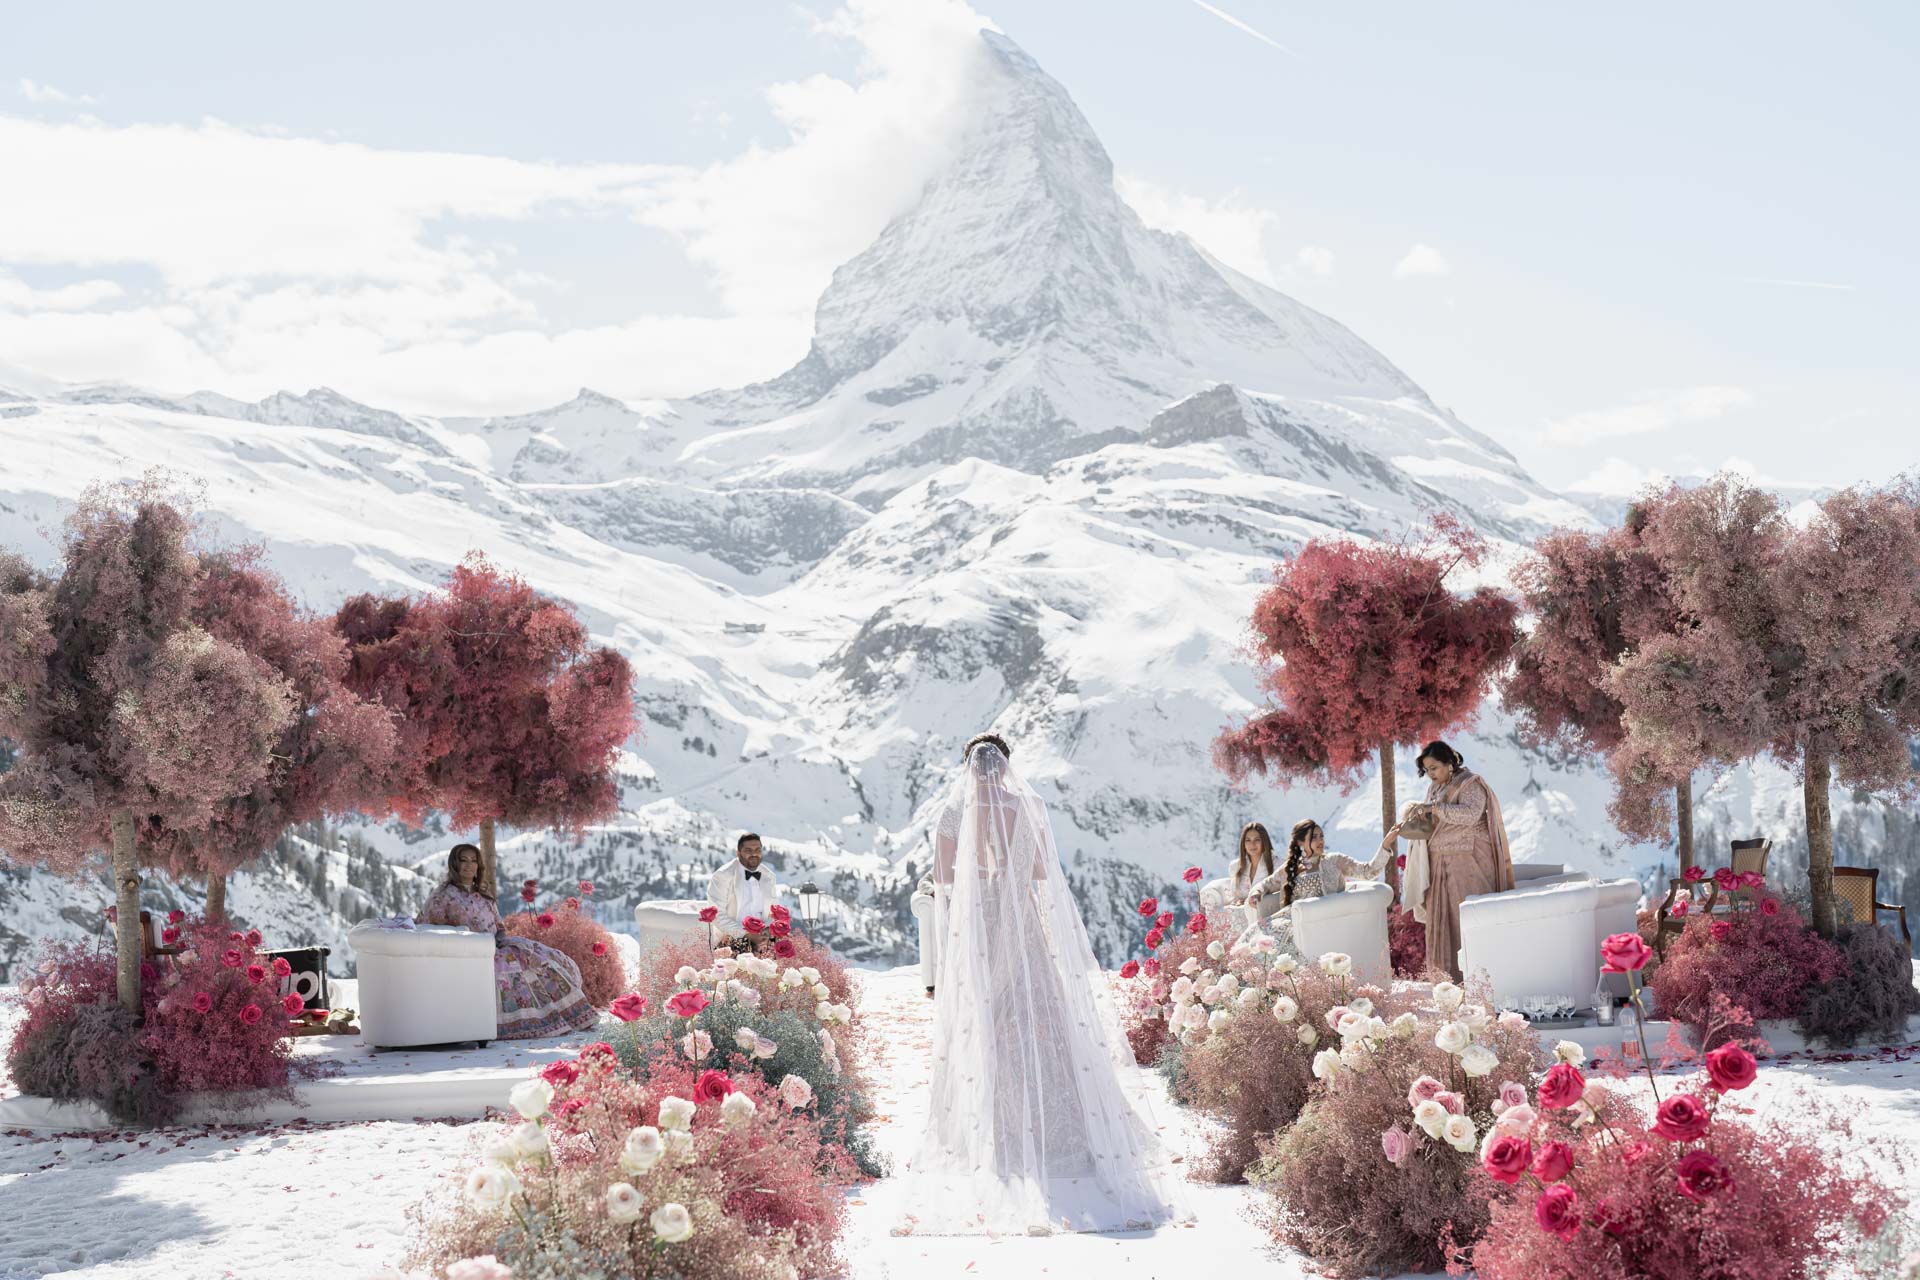 A wedding on the slopes of Matterhorn mountain, between the white of snow and the colors of India :: 33